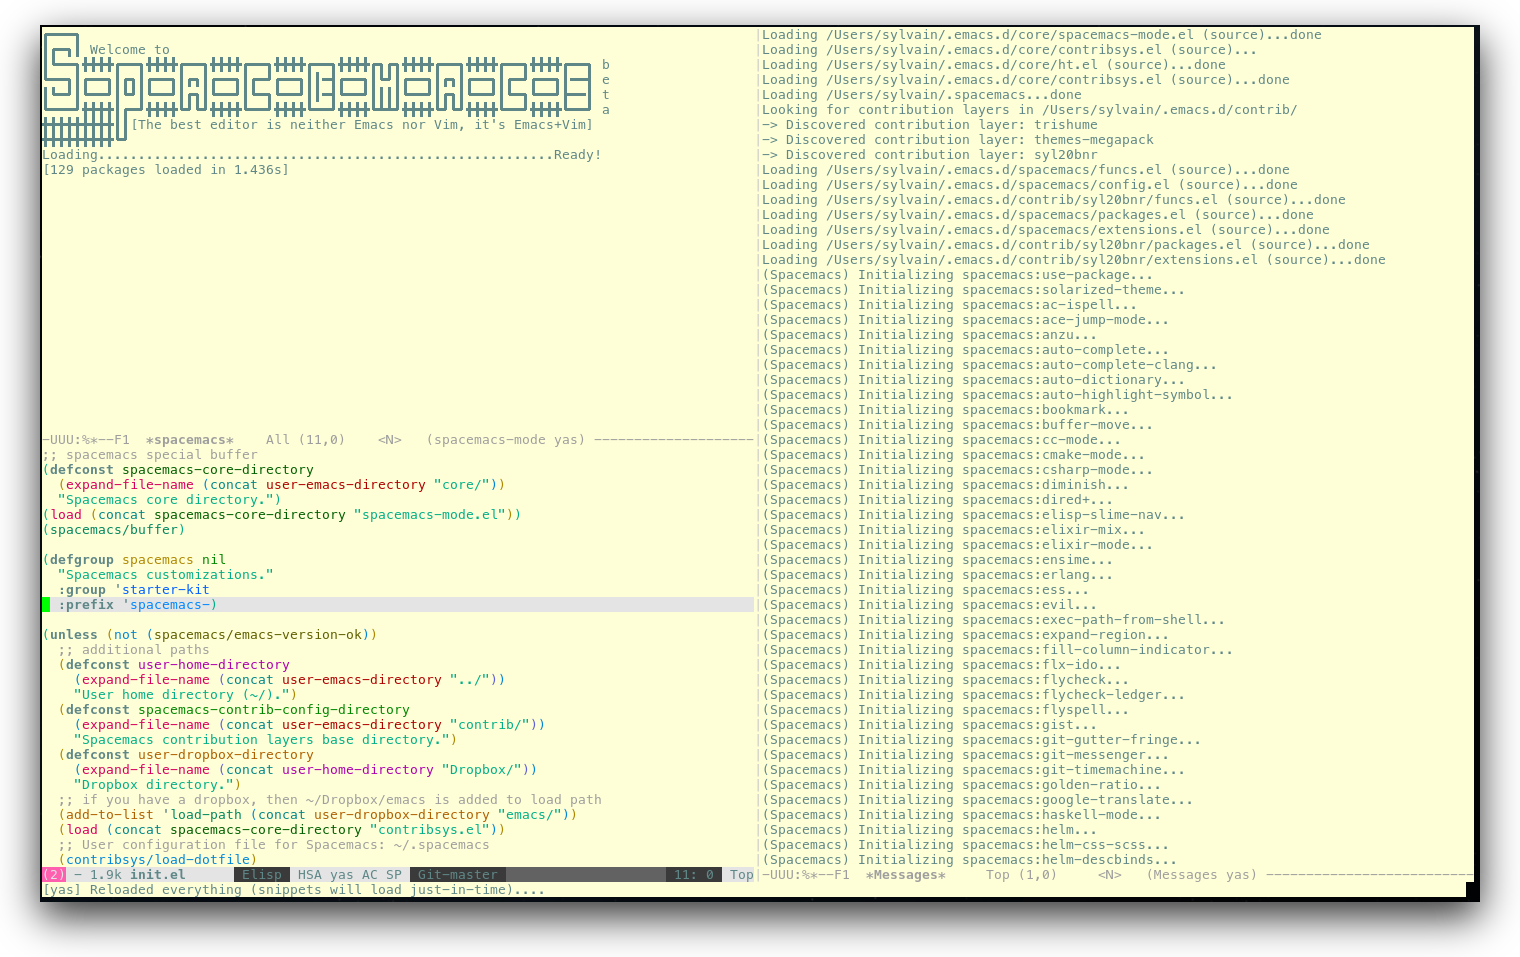 /TakeV/spacemacs/media/commit/4a19bd9d33ca0d184b8c6c0dd86a2e4c6f232325/doc/img/spacemacs-urxvt.png